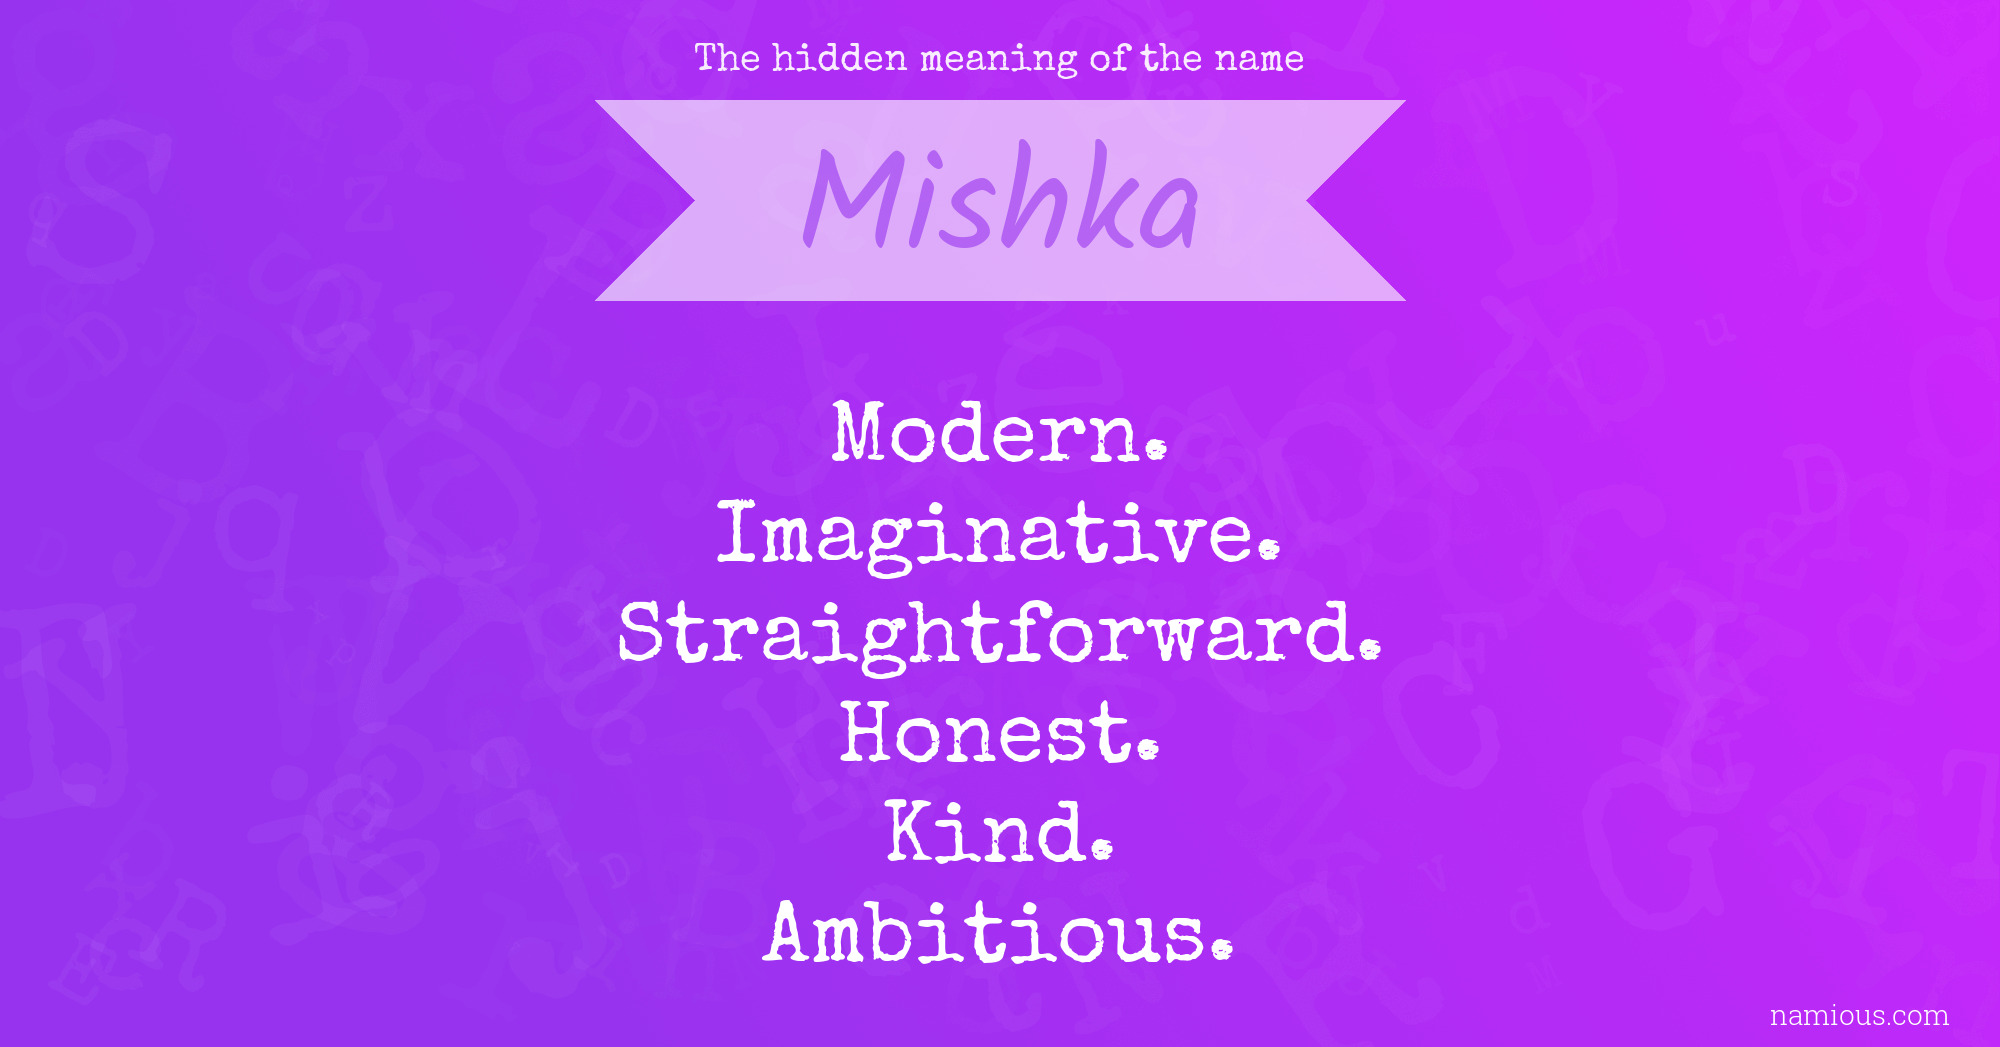 The hidden meaning of the name Mishka